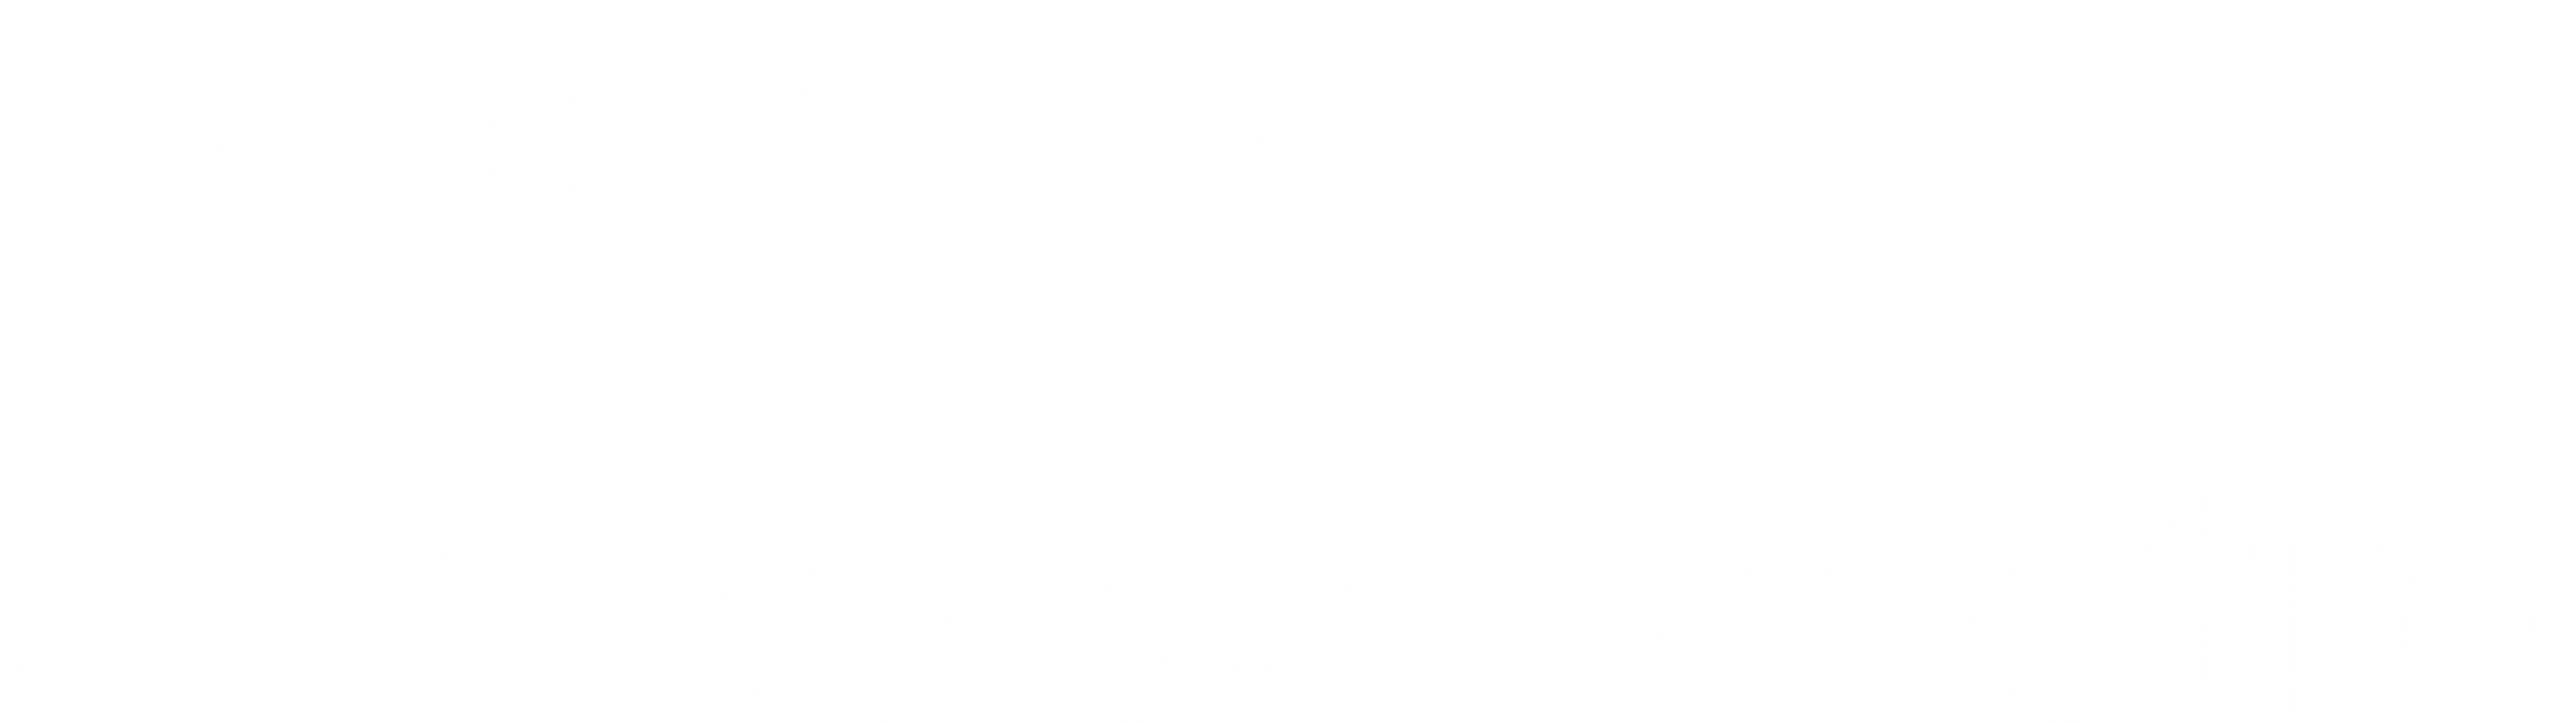 acquista-image.png